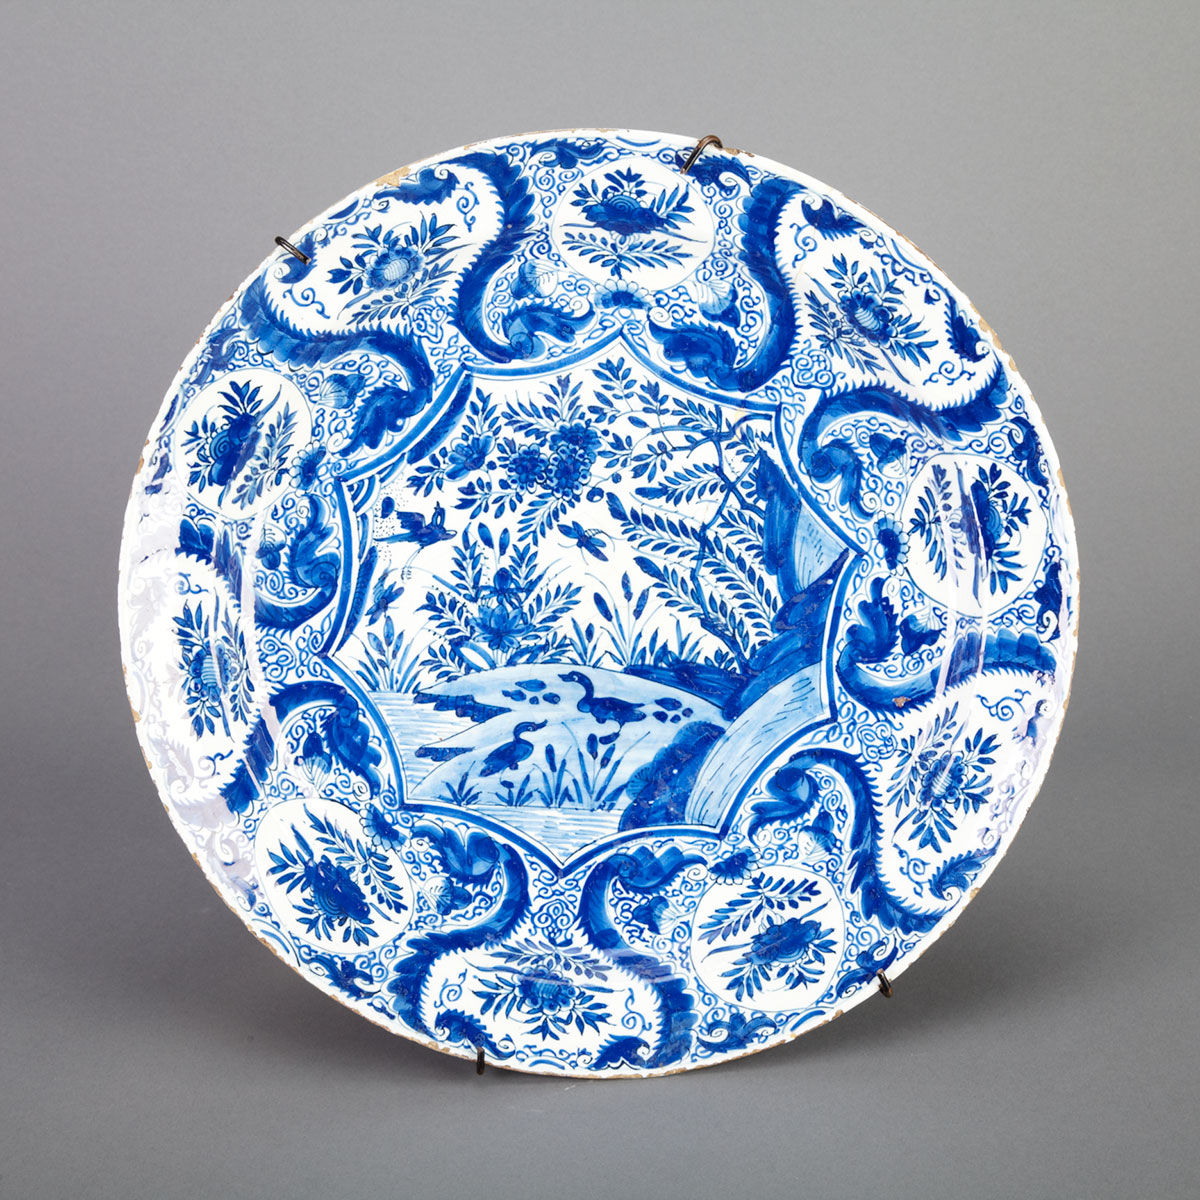 Delft Blue and White Charger 18th